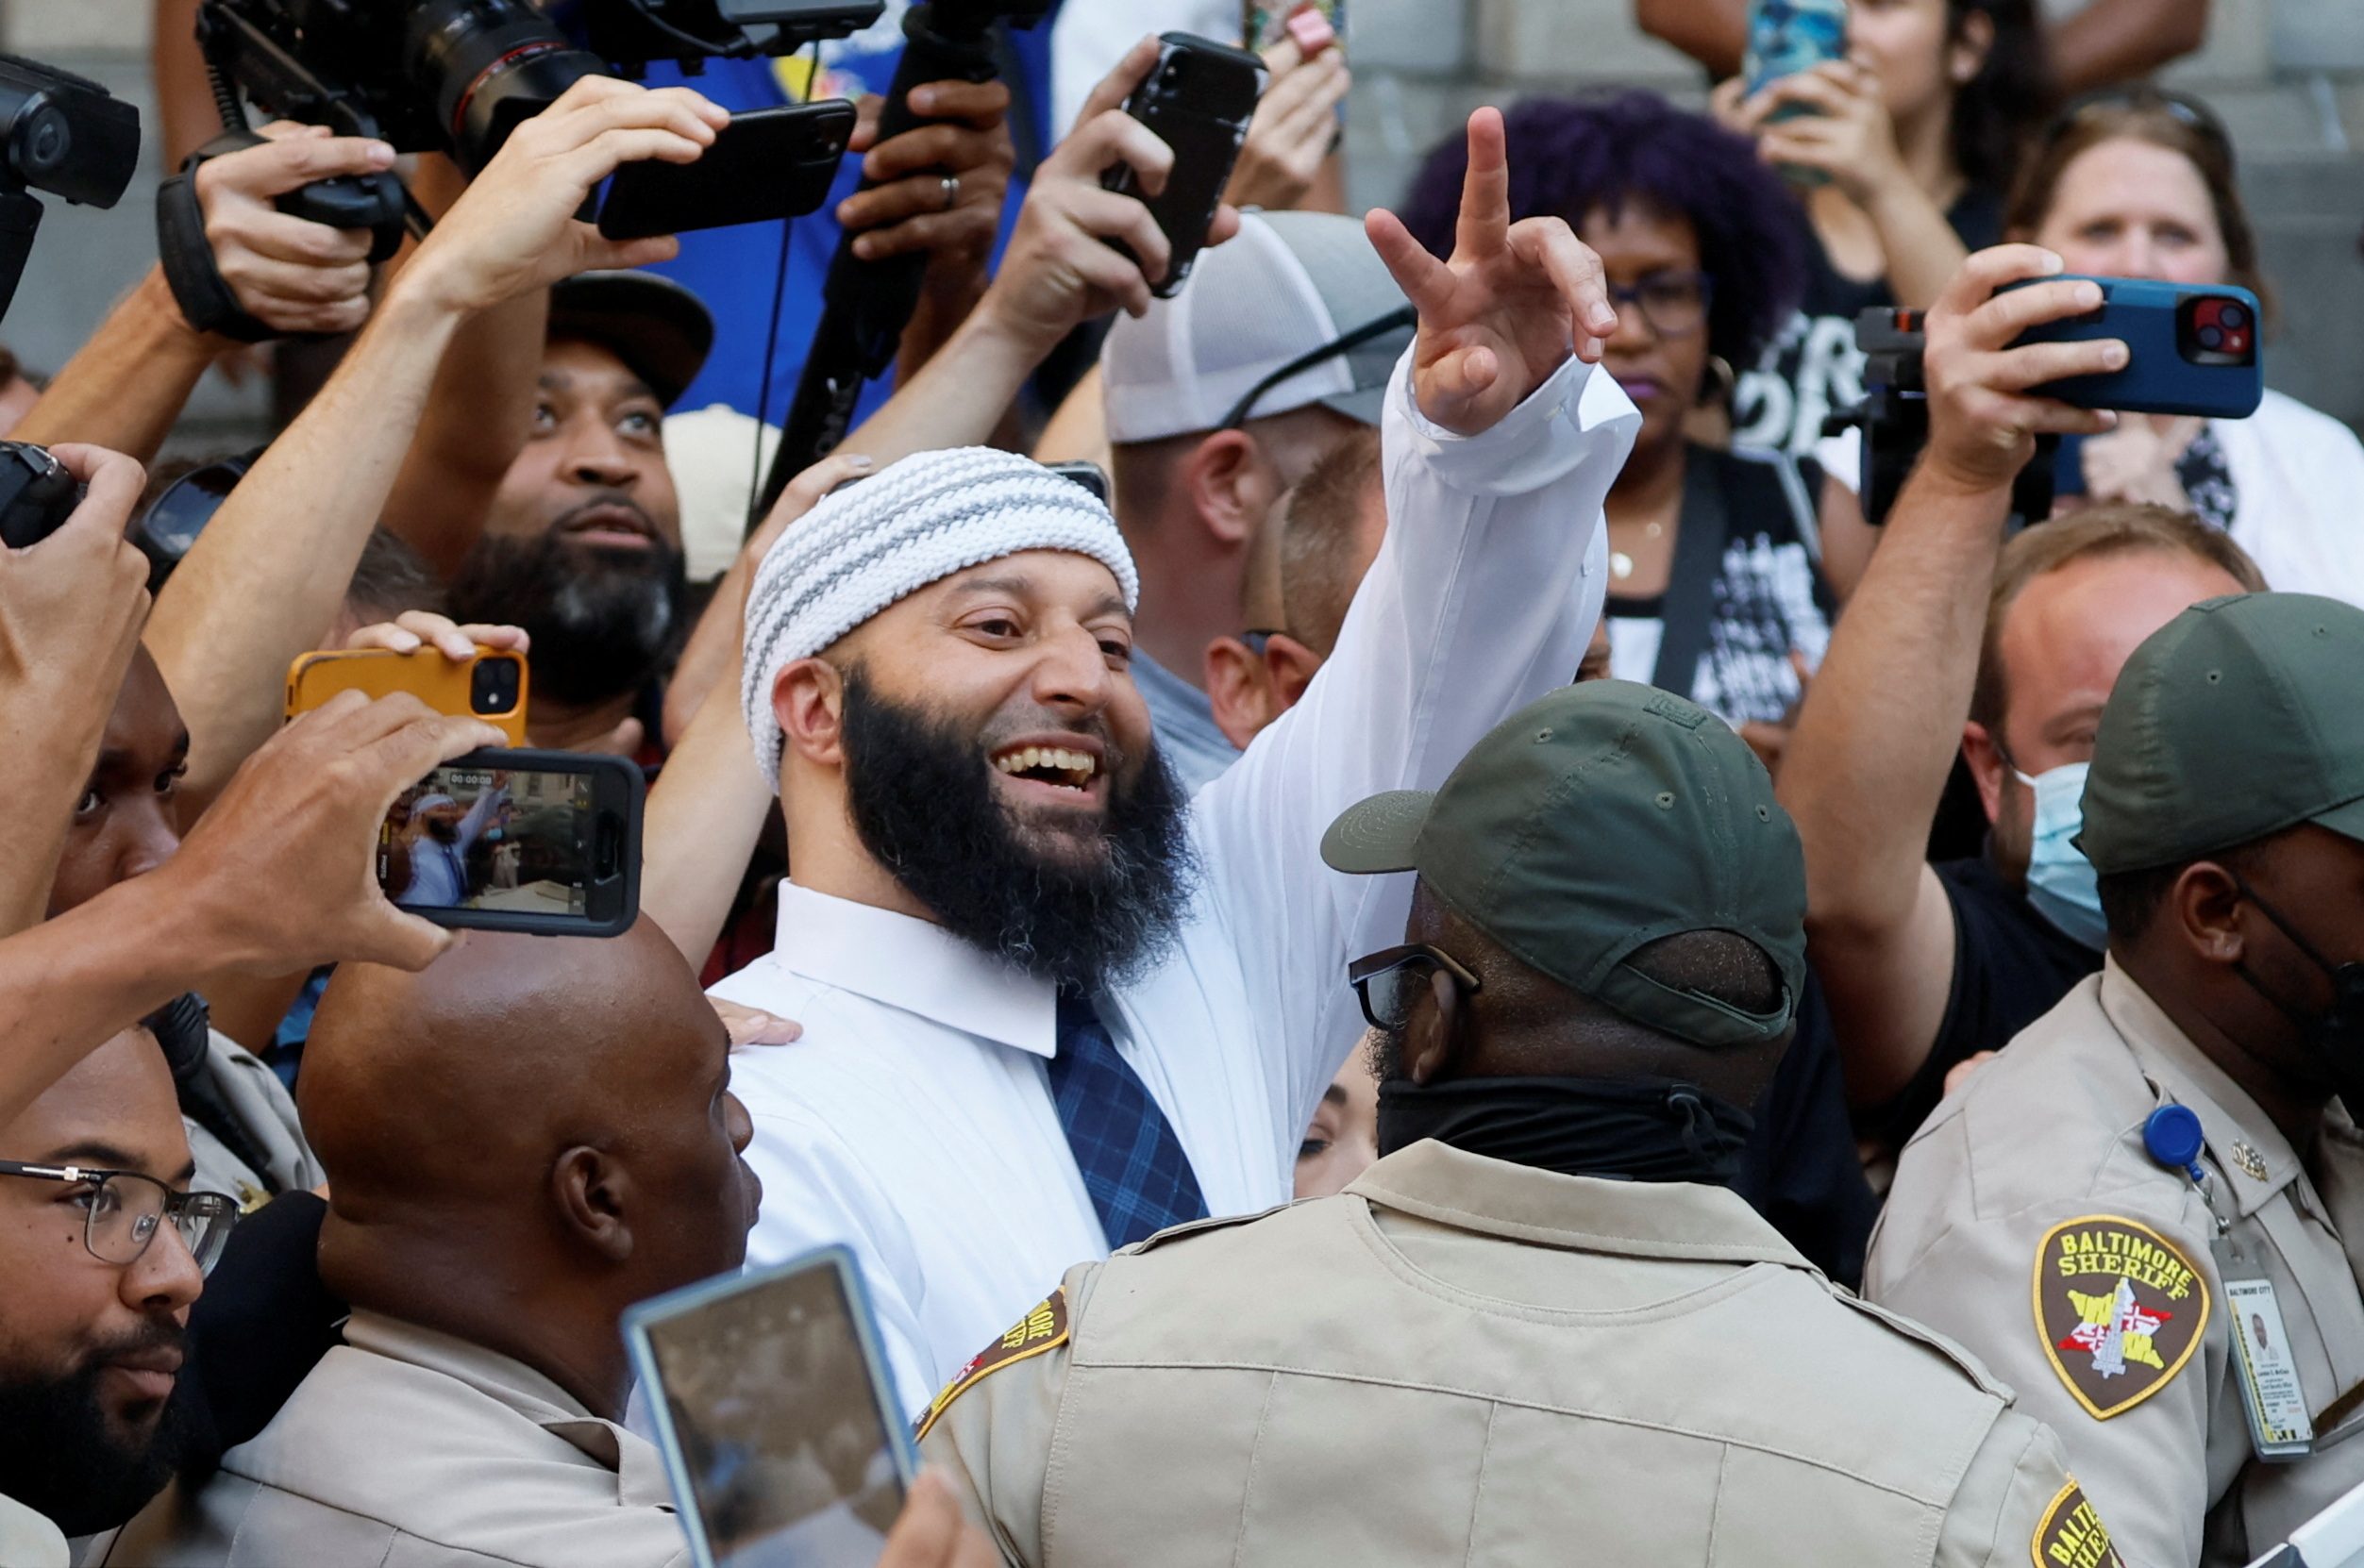 PHOTO: Adnan Syed, whose case was chronicled in the hit podcast "Serial," smiles and waves as he leaves the courthouse after a judge overturned Syed's 2000 conviction and ordered a new trial at the Baltimore City Circuit Courthouse, Sept. 19, 2022